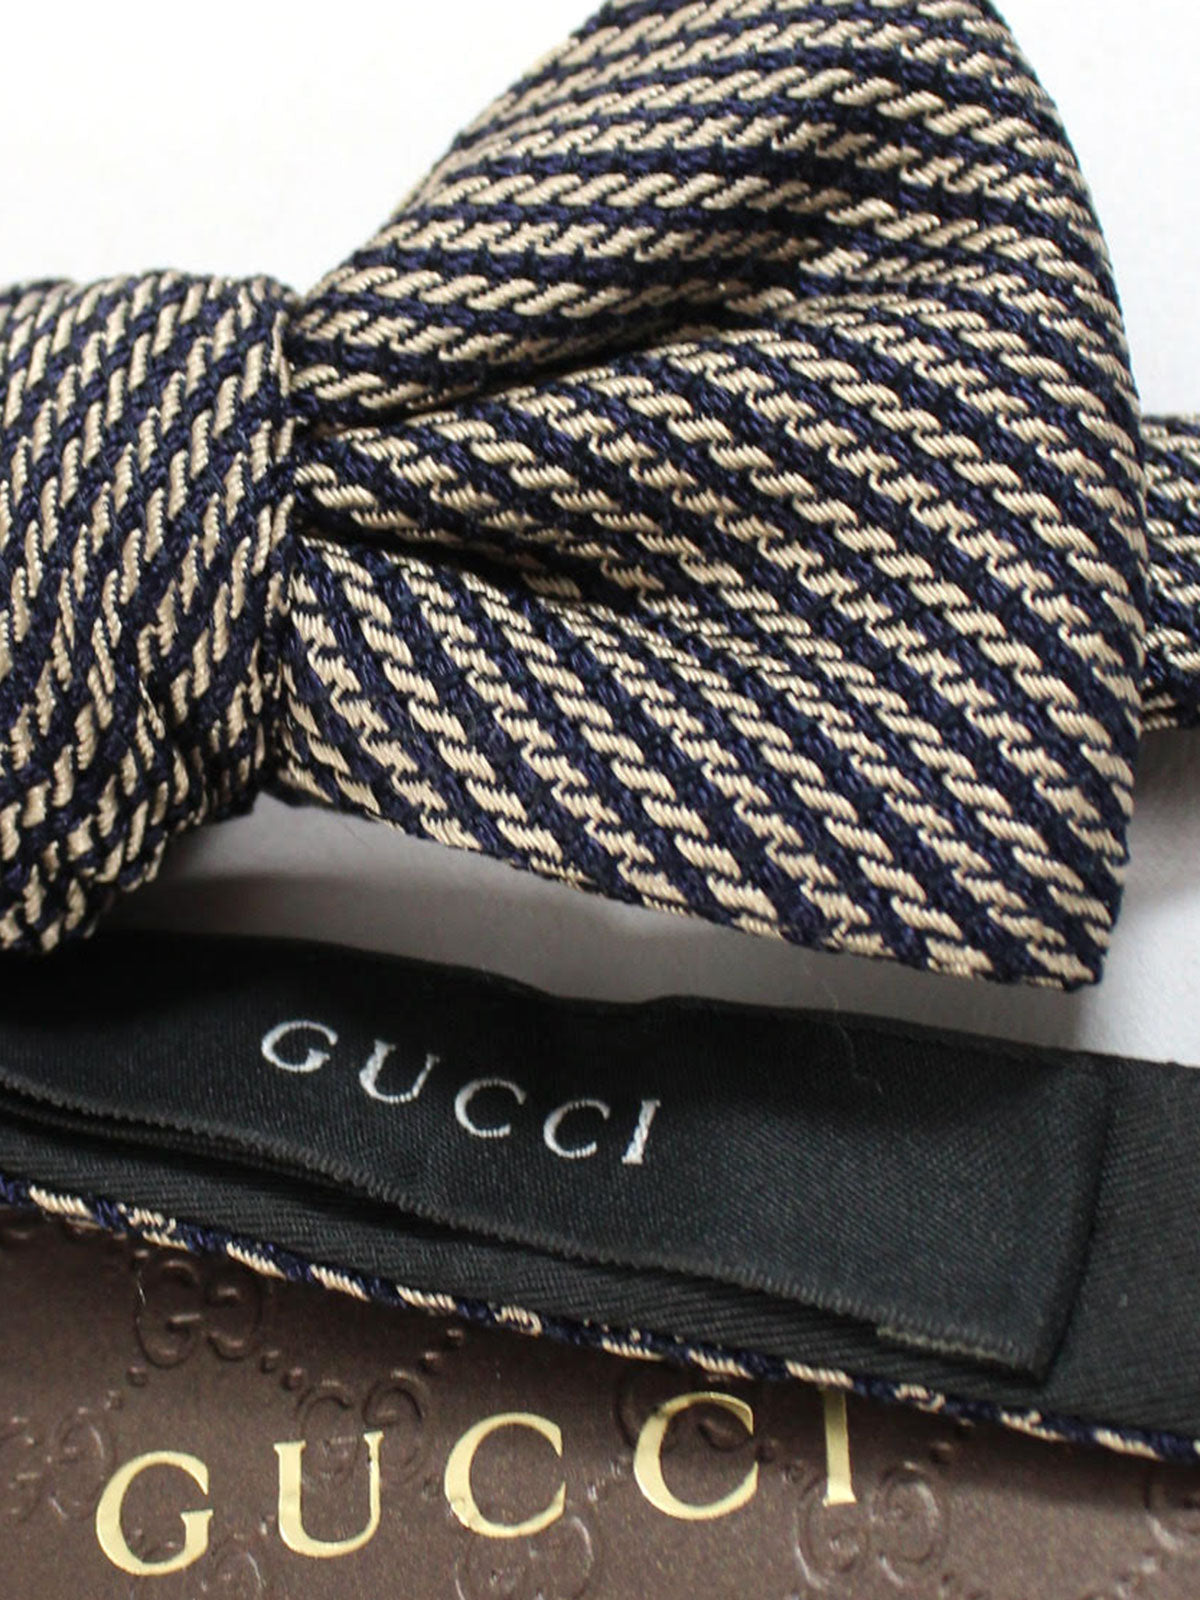 Gucci Bow Tie Taupe Navy Stripes Design - Self Tie Bow Tie